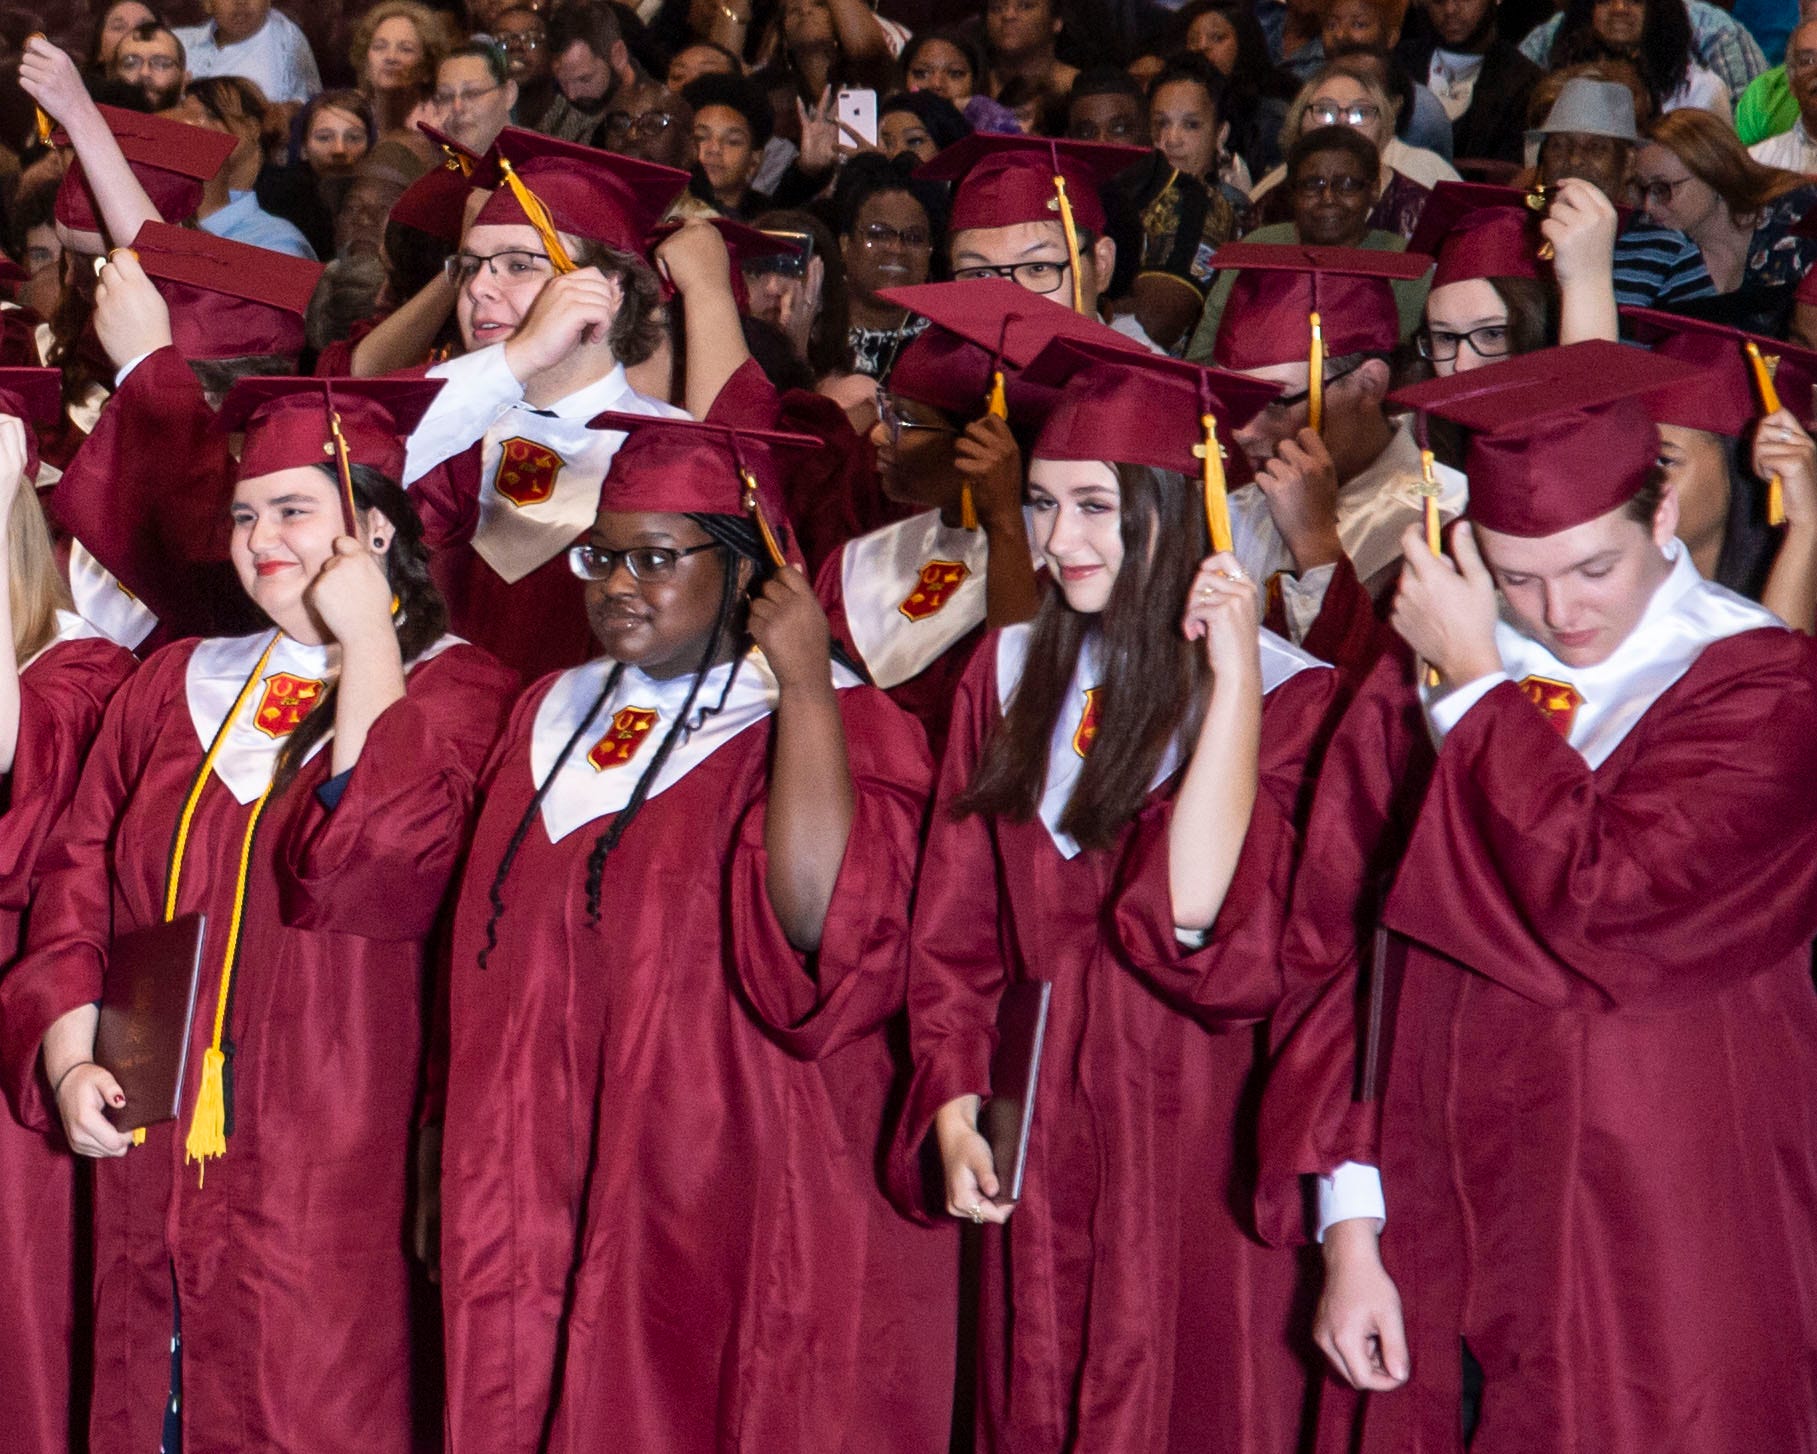 Lafayette Parish: Here is the schedule for high school graduations